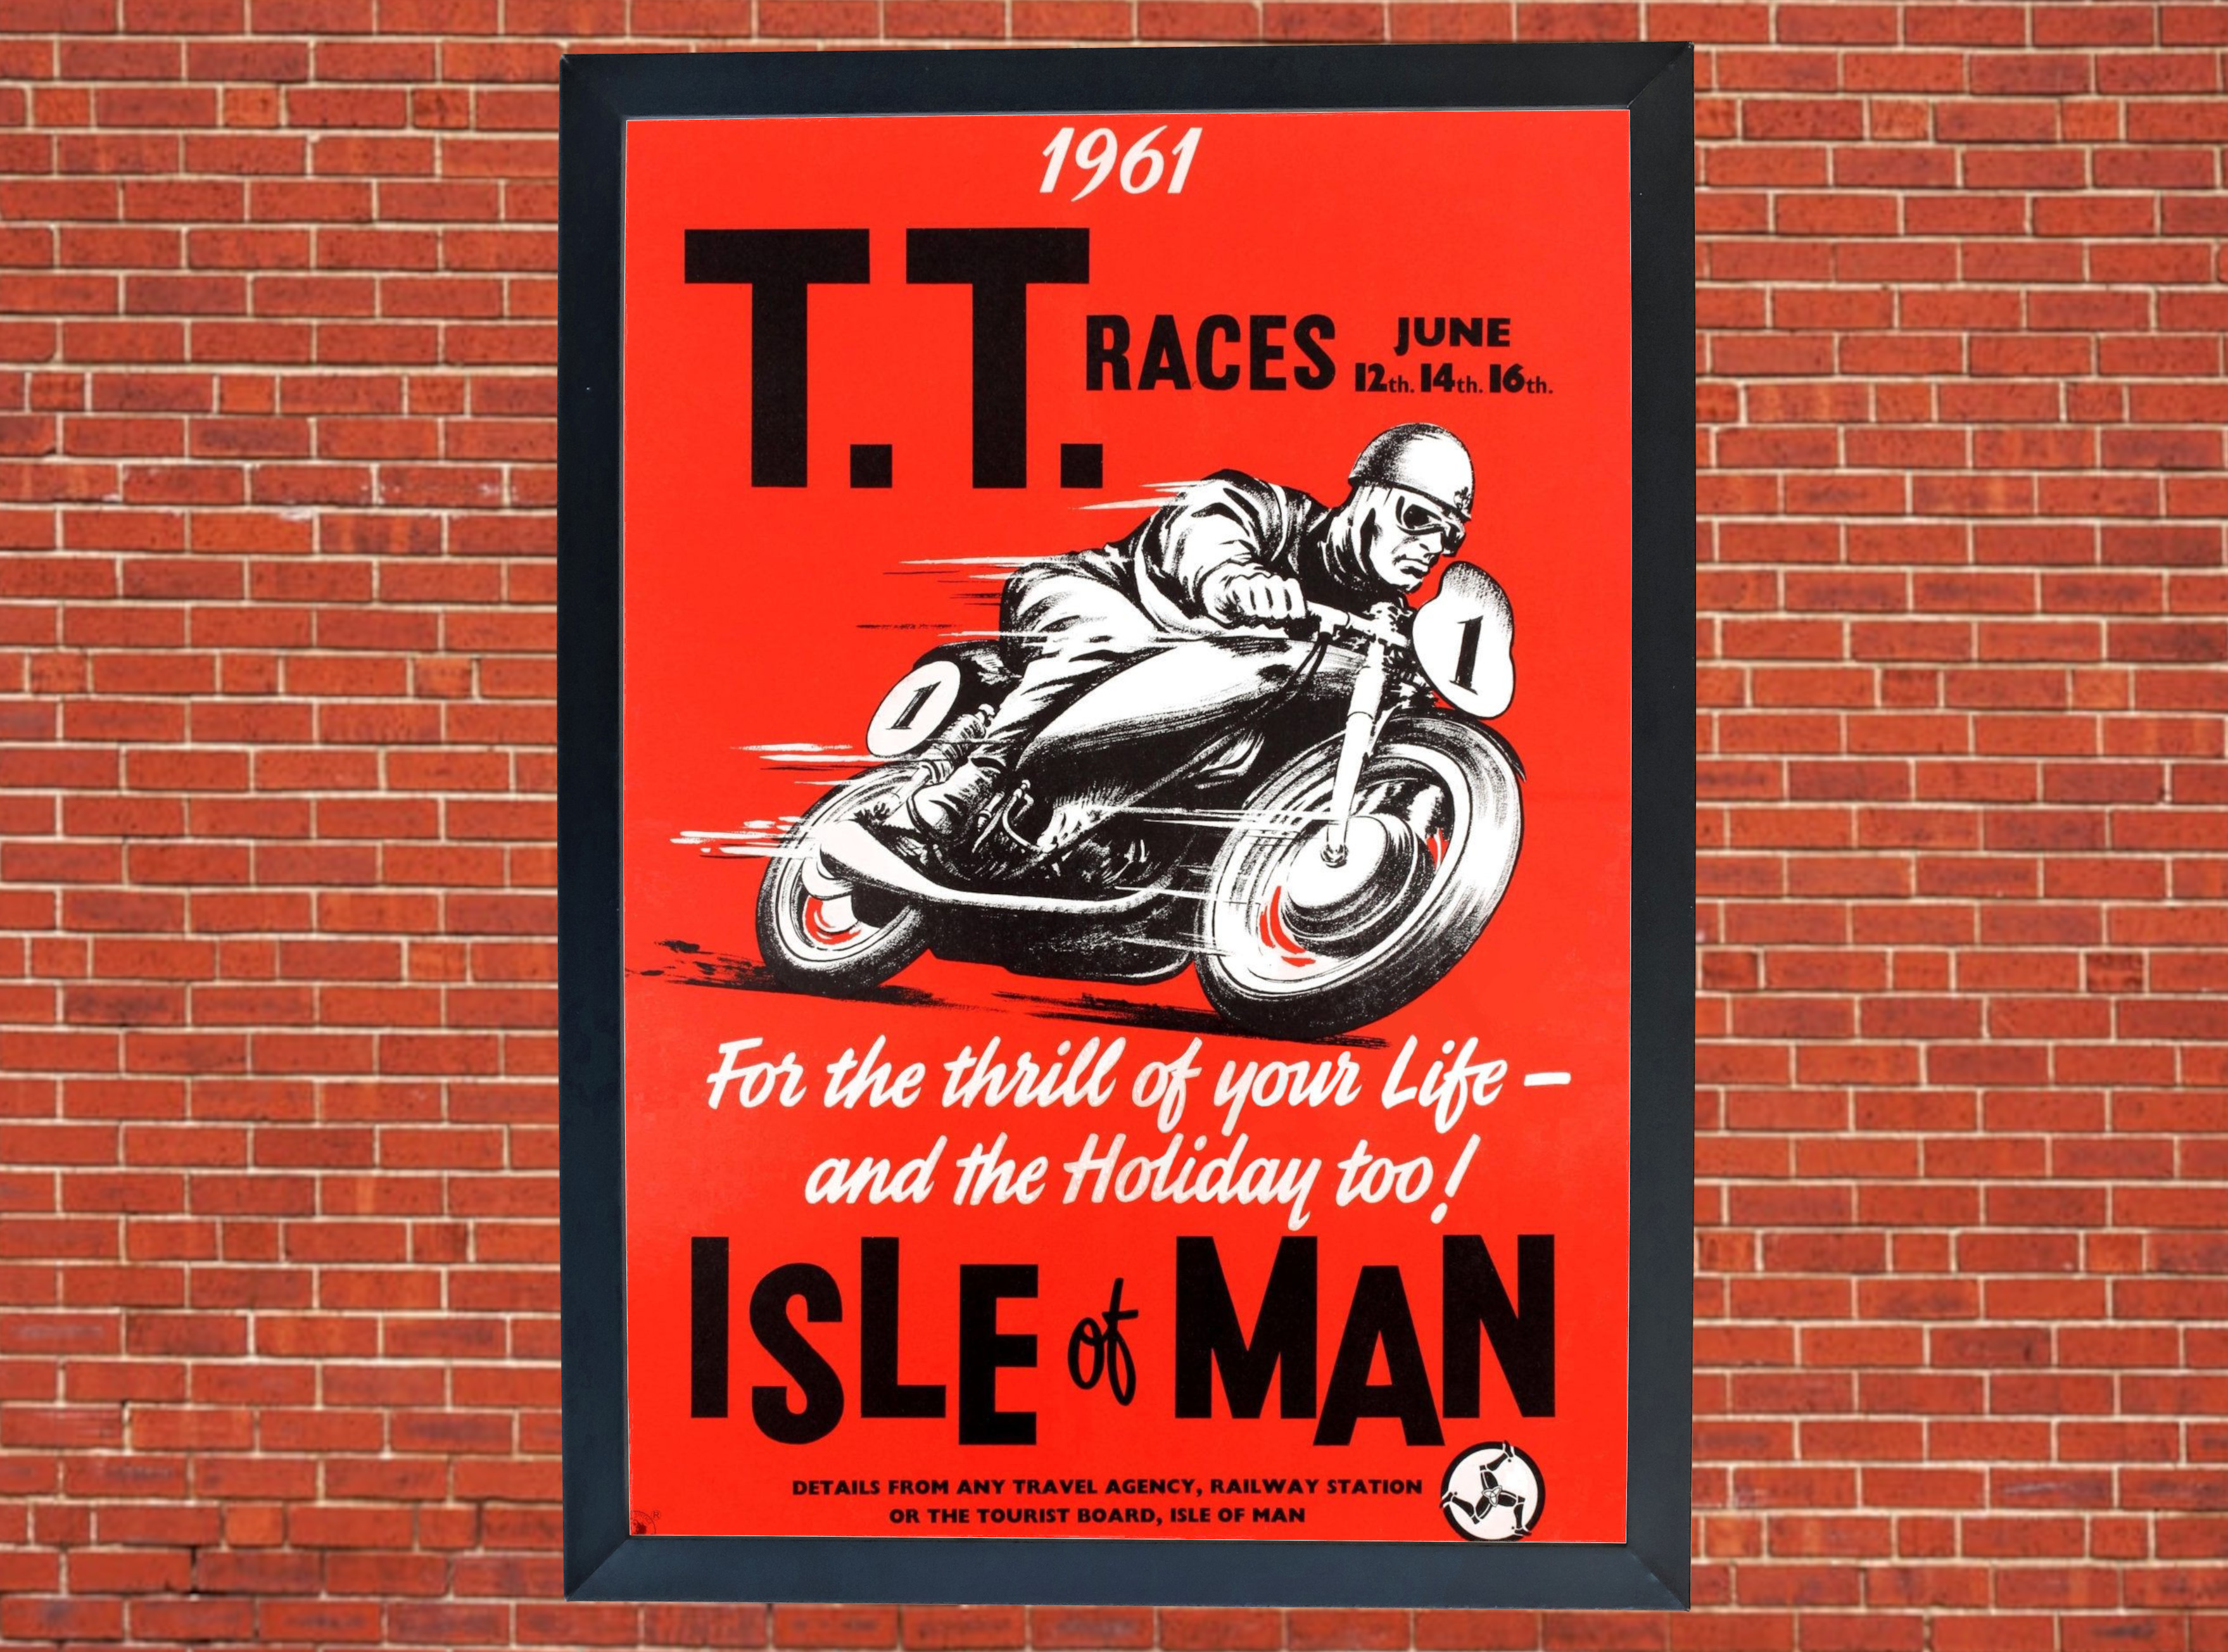 TT Races Isle of Man Promotional Motorcycle Poster - Red, Size A3/A4